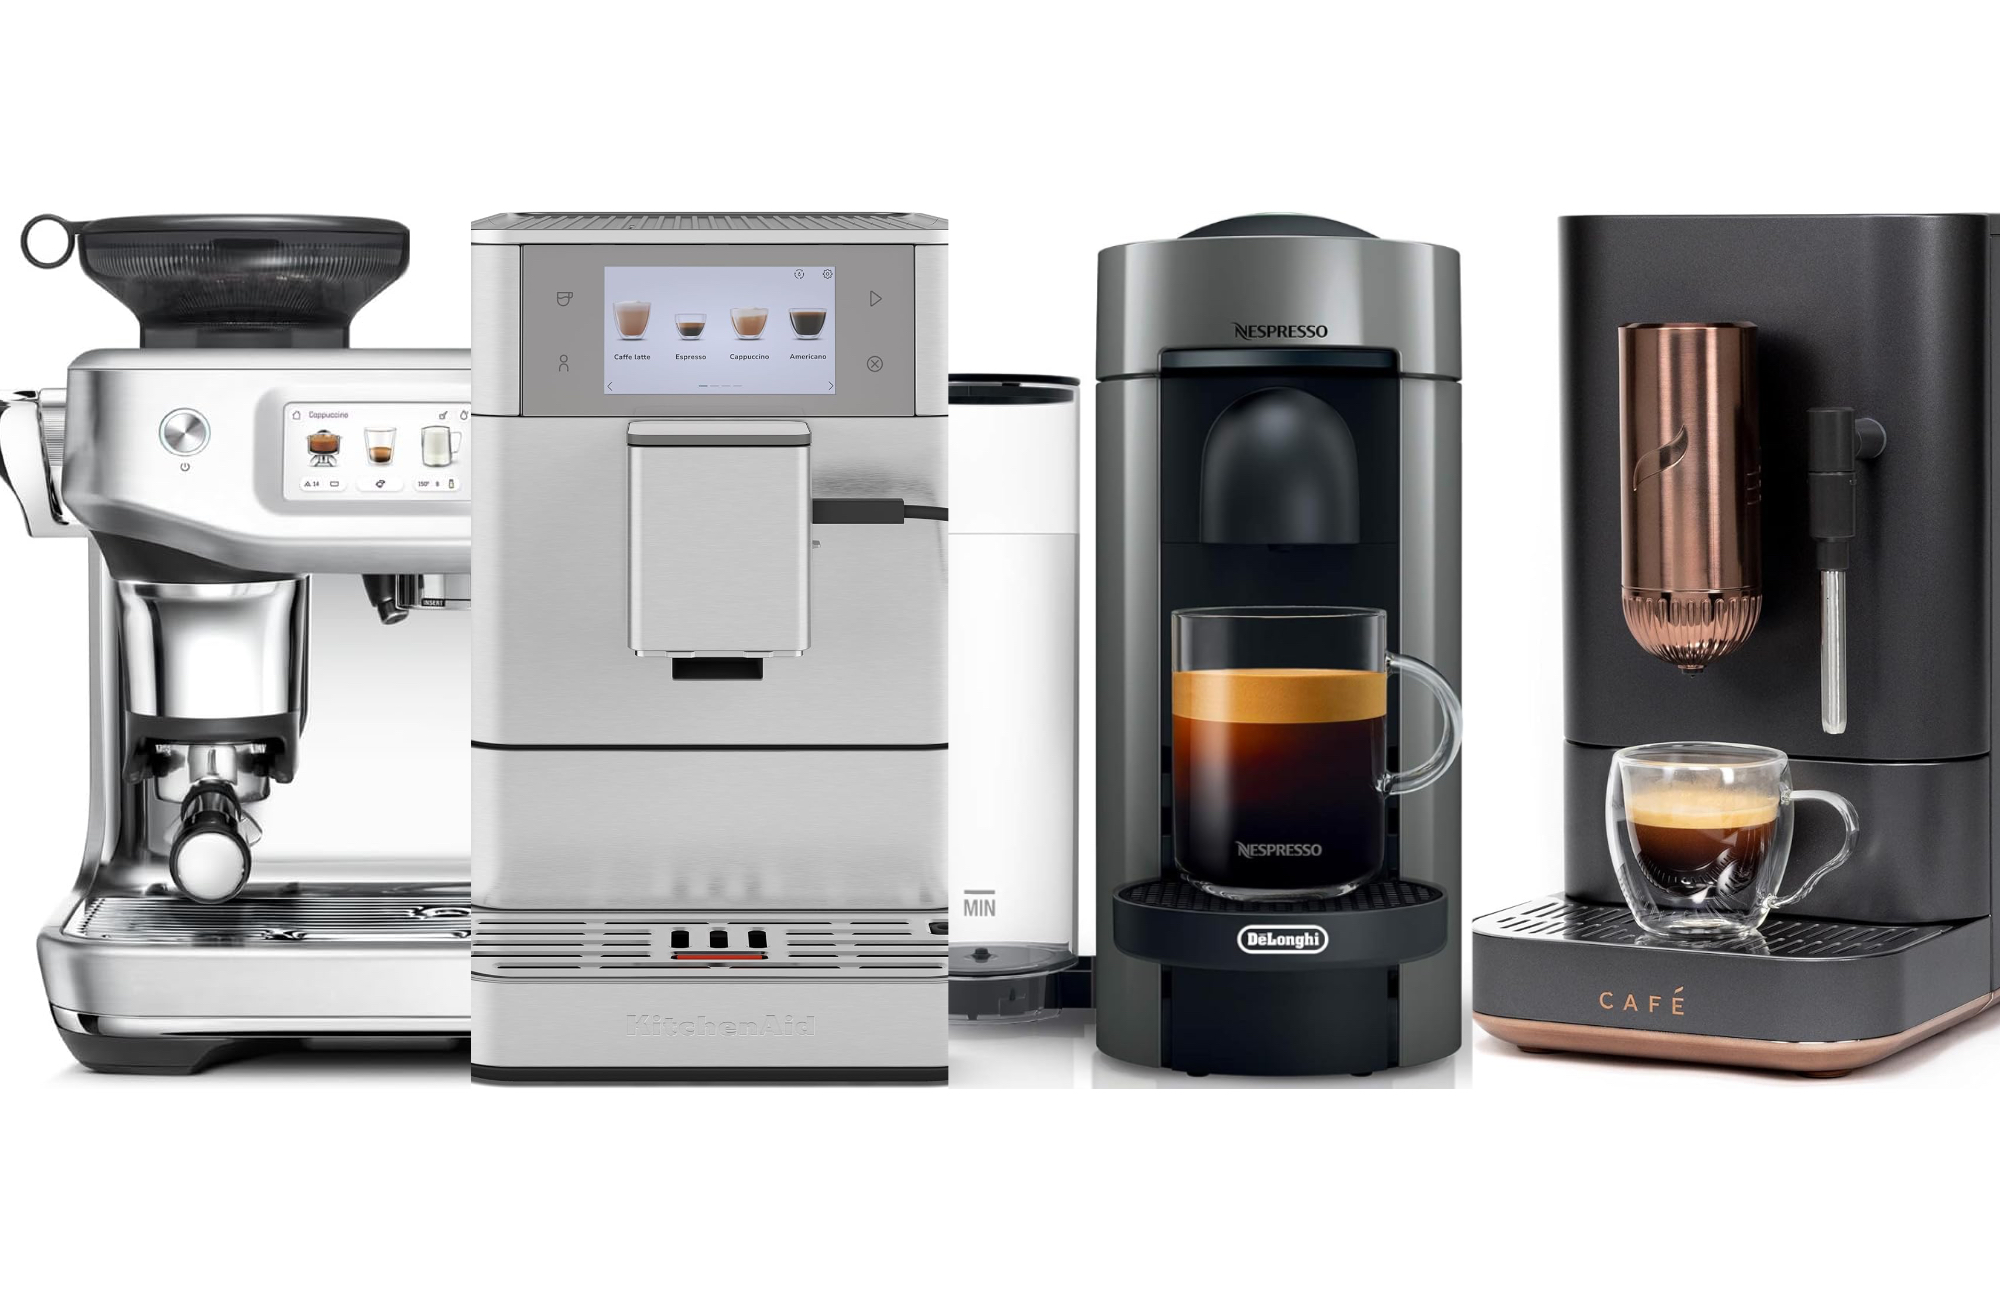 The best espresso machines for easy, even extraction at home